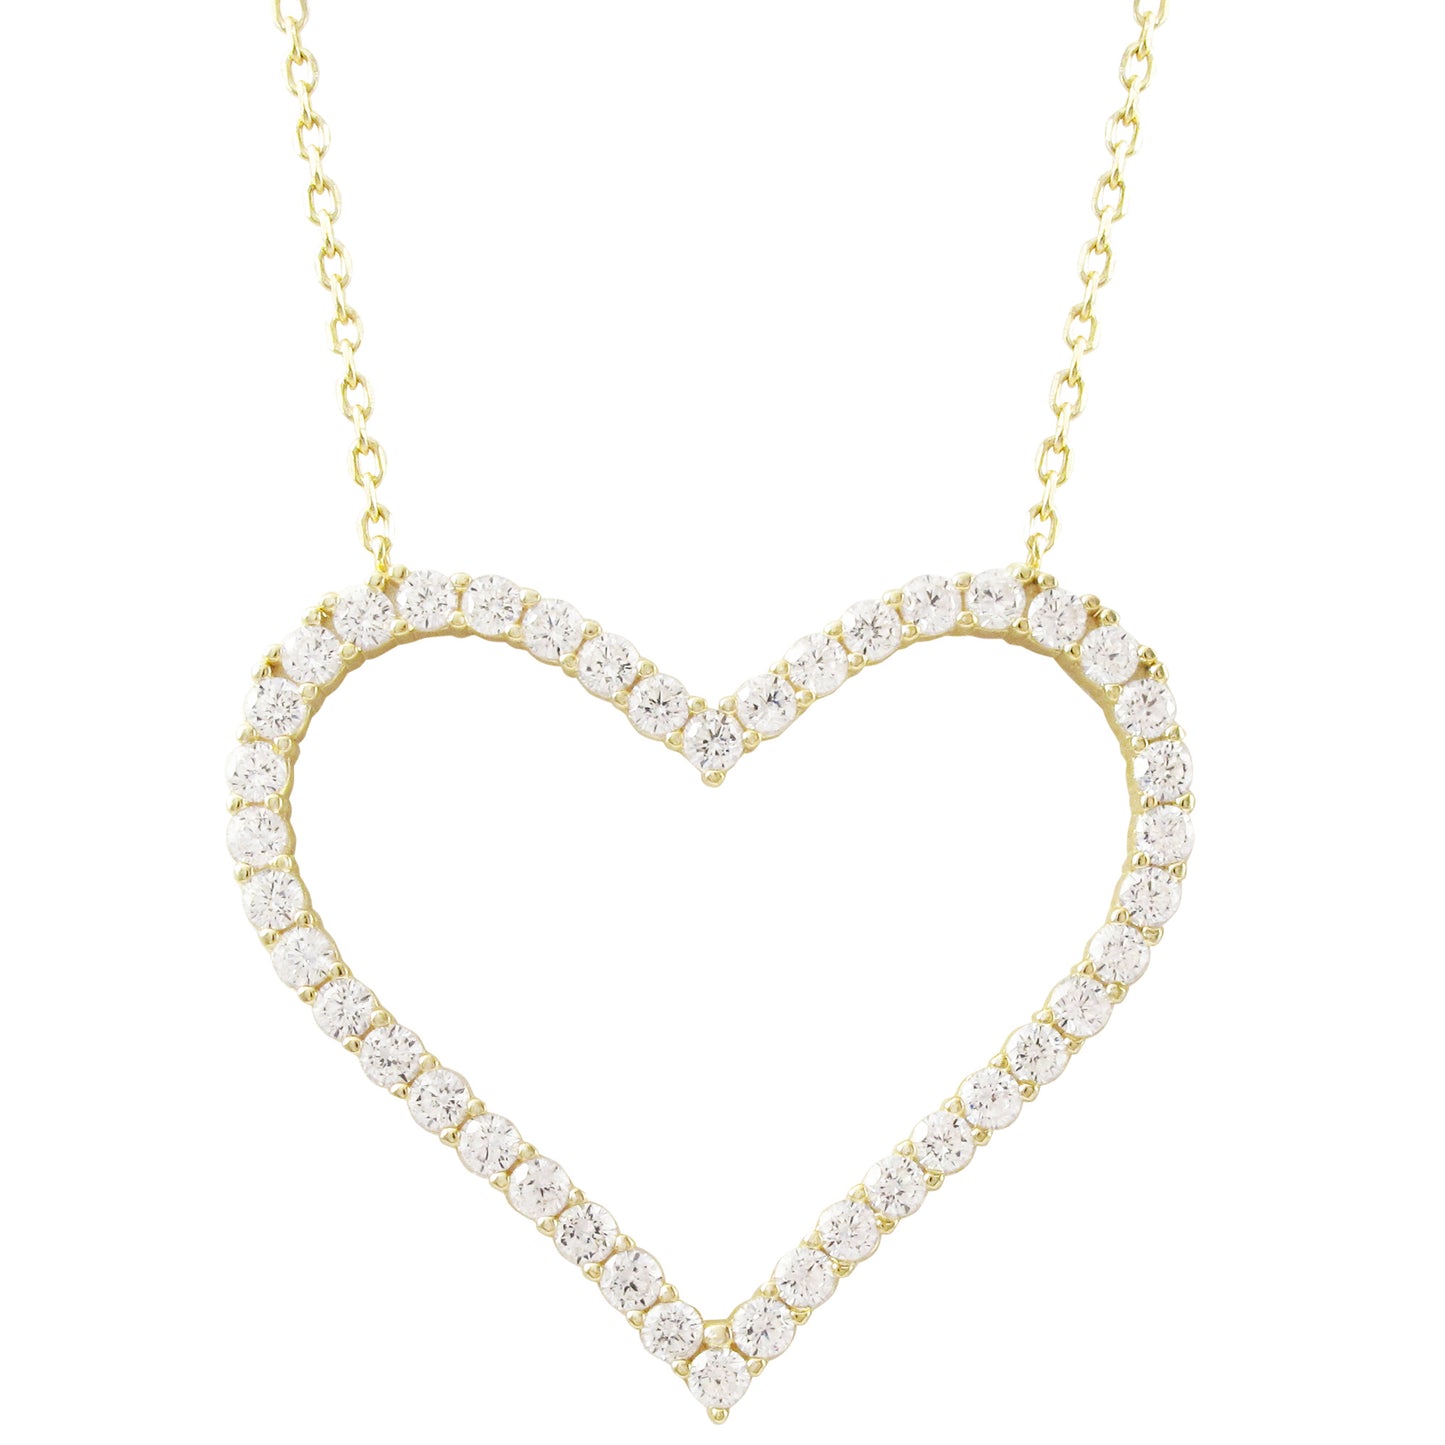 Perfect Heart Necklace